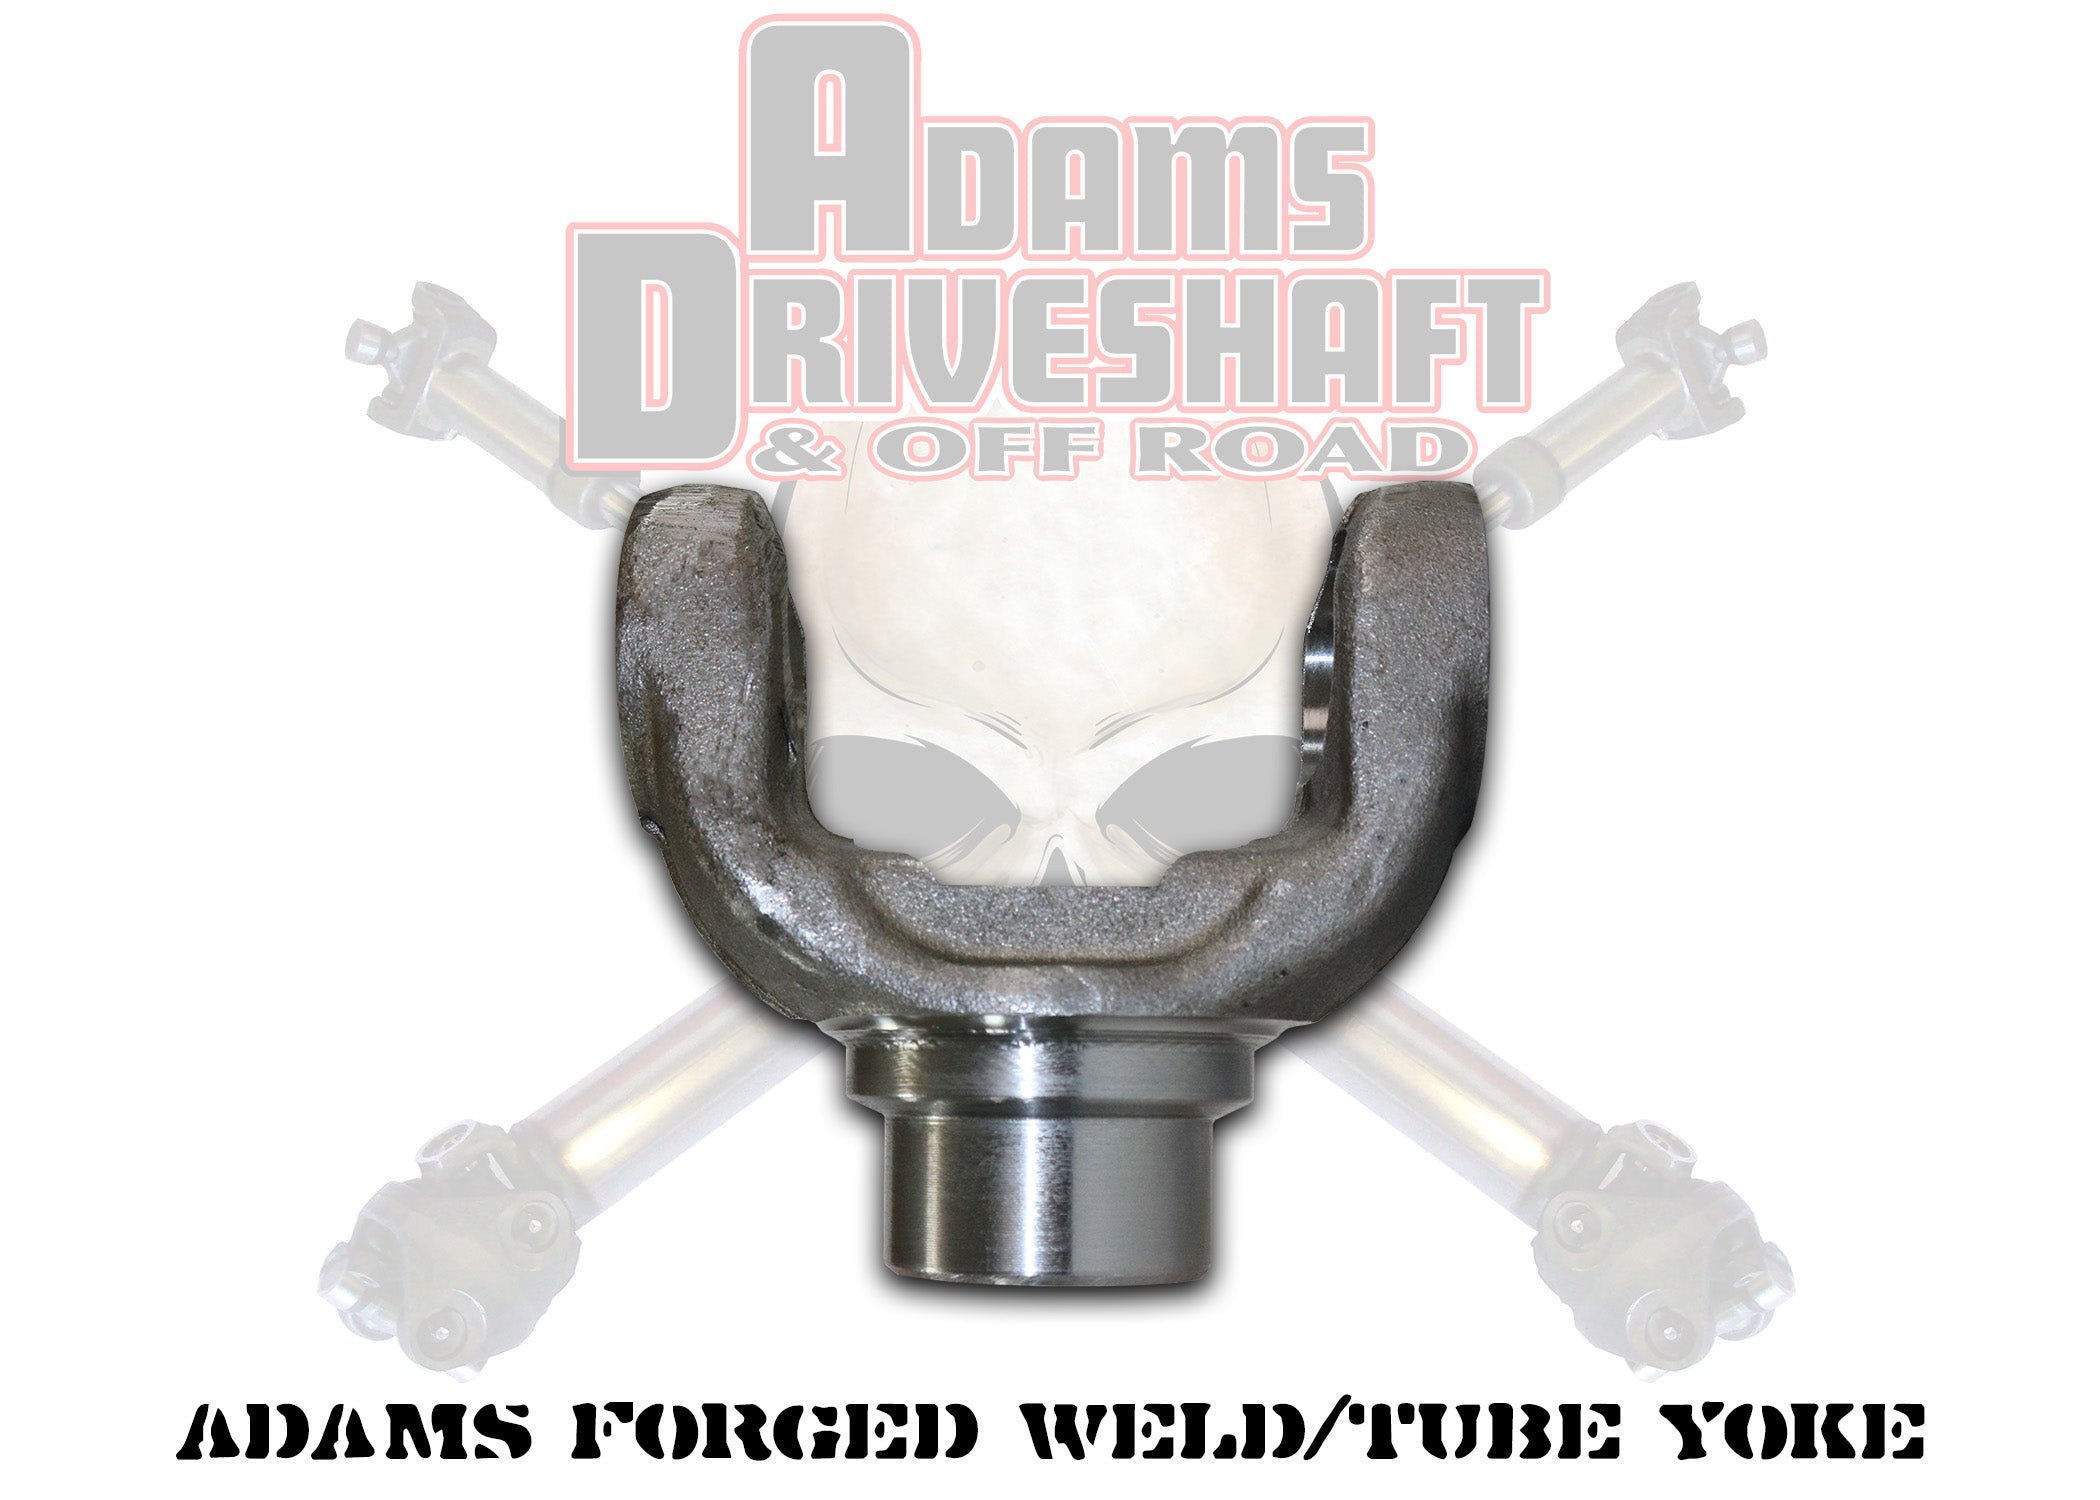 Adams Driveshaft's Build your Own - DIY - Offroad Buggy, Jeep Driveshaft, Etc. in 1410 Series